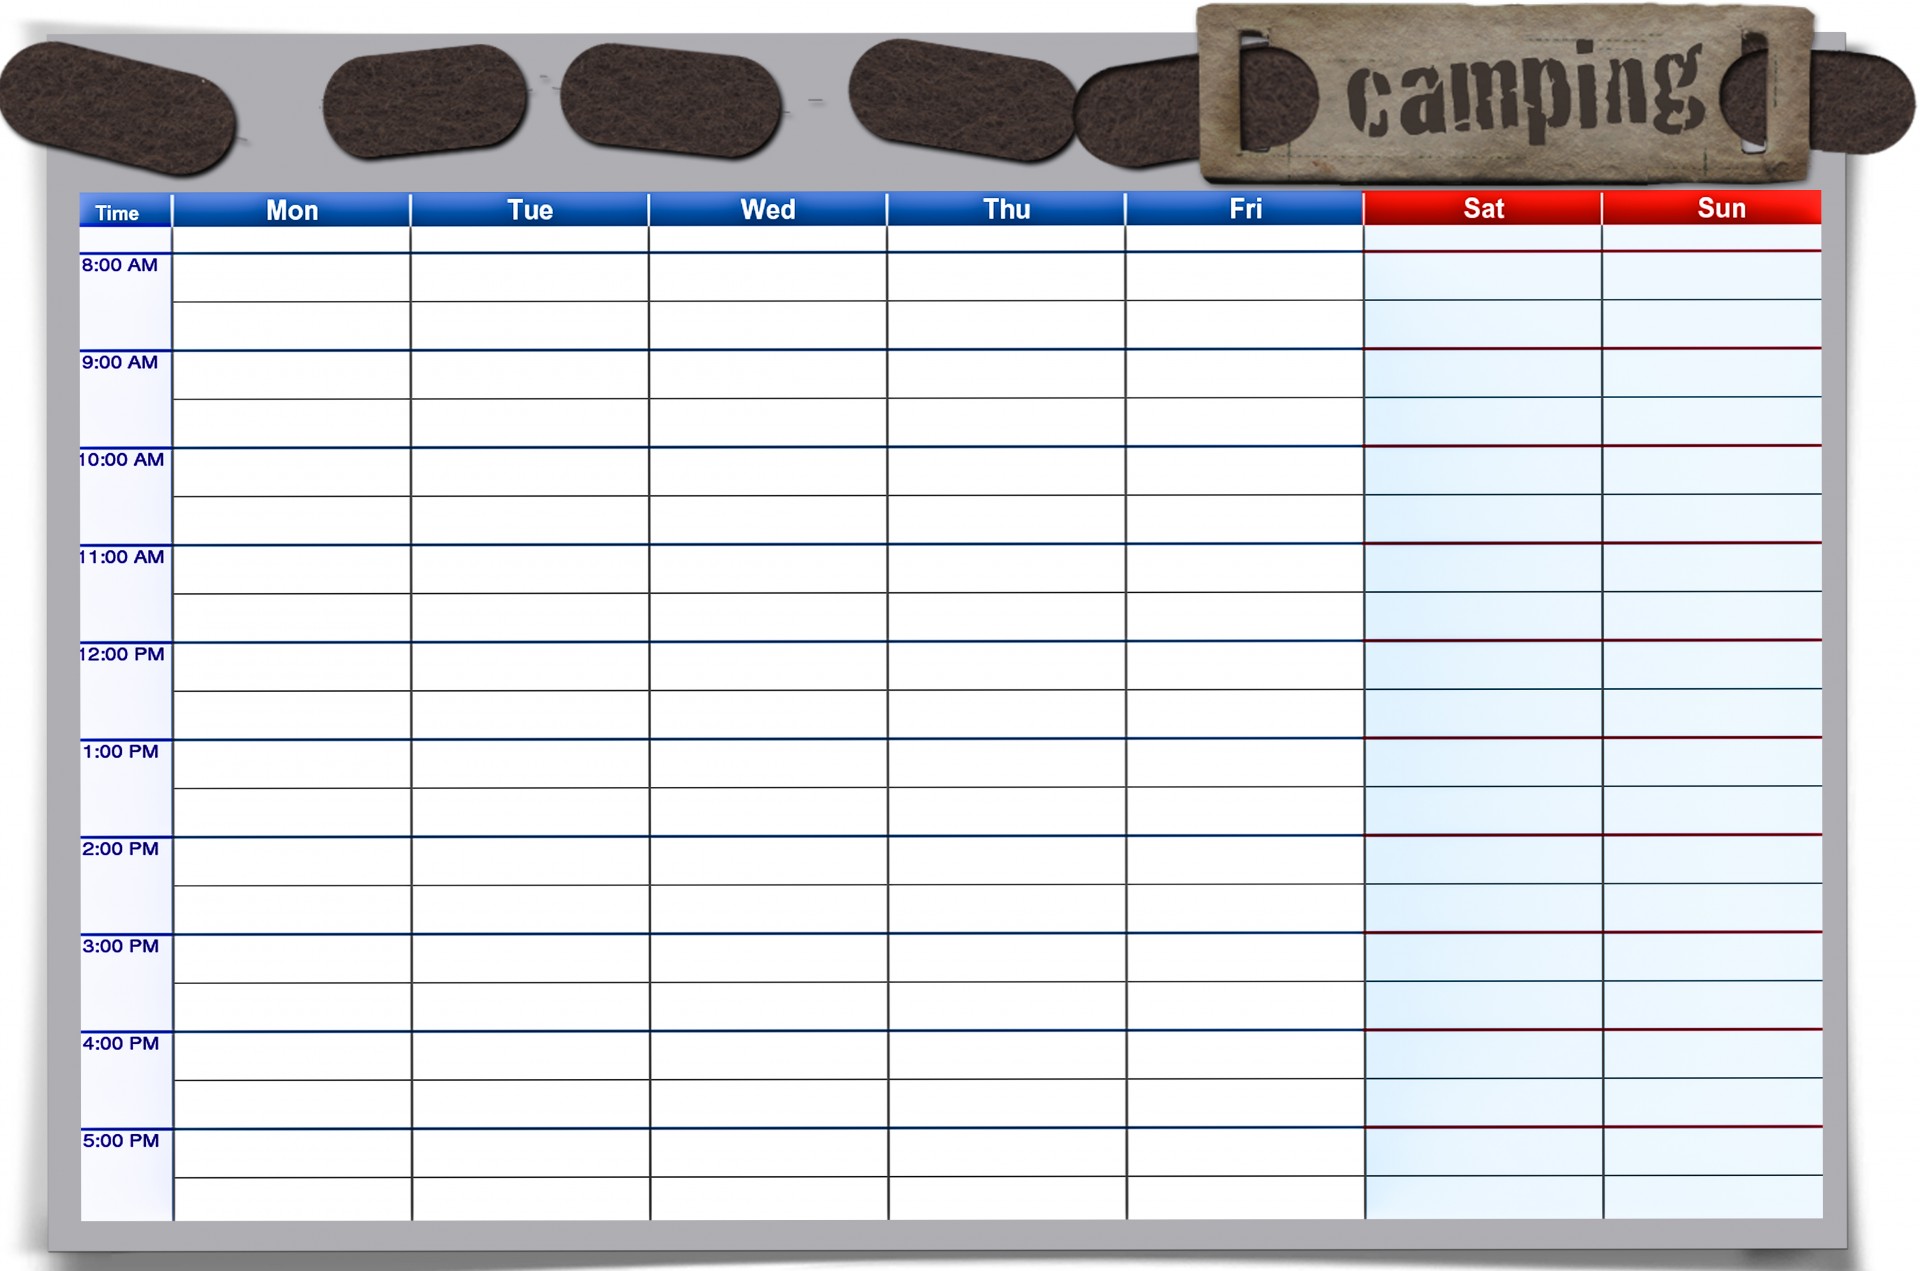 Camp list. Camp Schedule. Camping list Sample. Day planning stock.